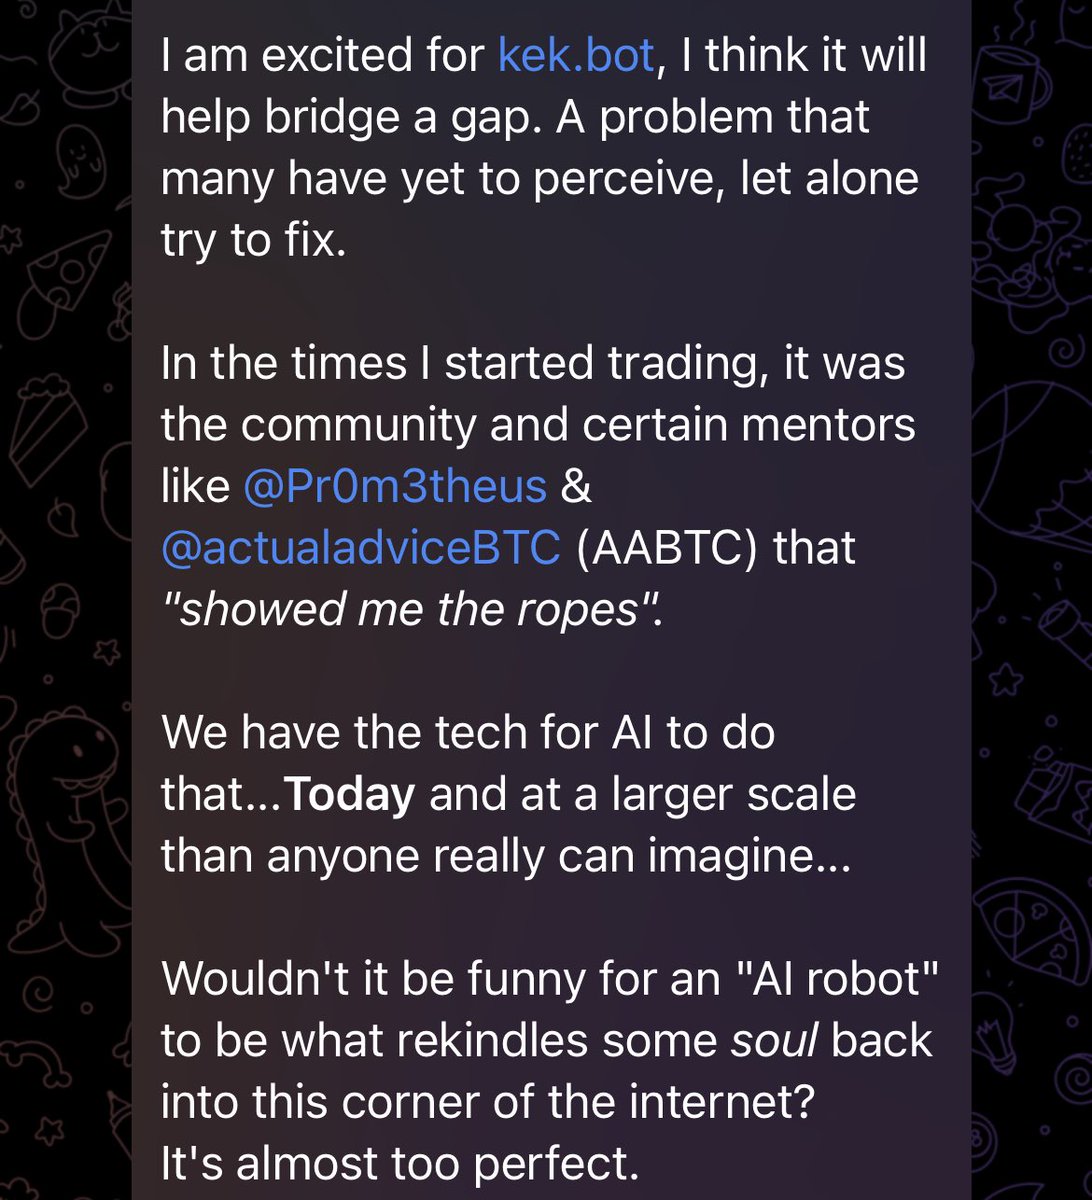 My #PepeCoin thesis centers around its role in the 𝔹asedAI ZK-LLM network.

𝔹asedAI could become the third most valuable (#PepeCoin + #basedAI mcaps) blockchain.

But PepeCoin will also power other @pepecoins team products.

kek.bot is sounding GOOD (dev quote).